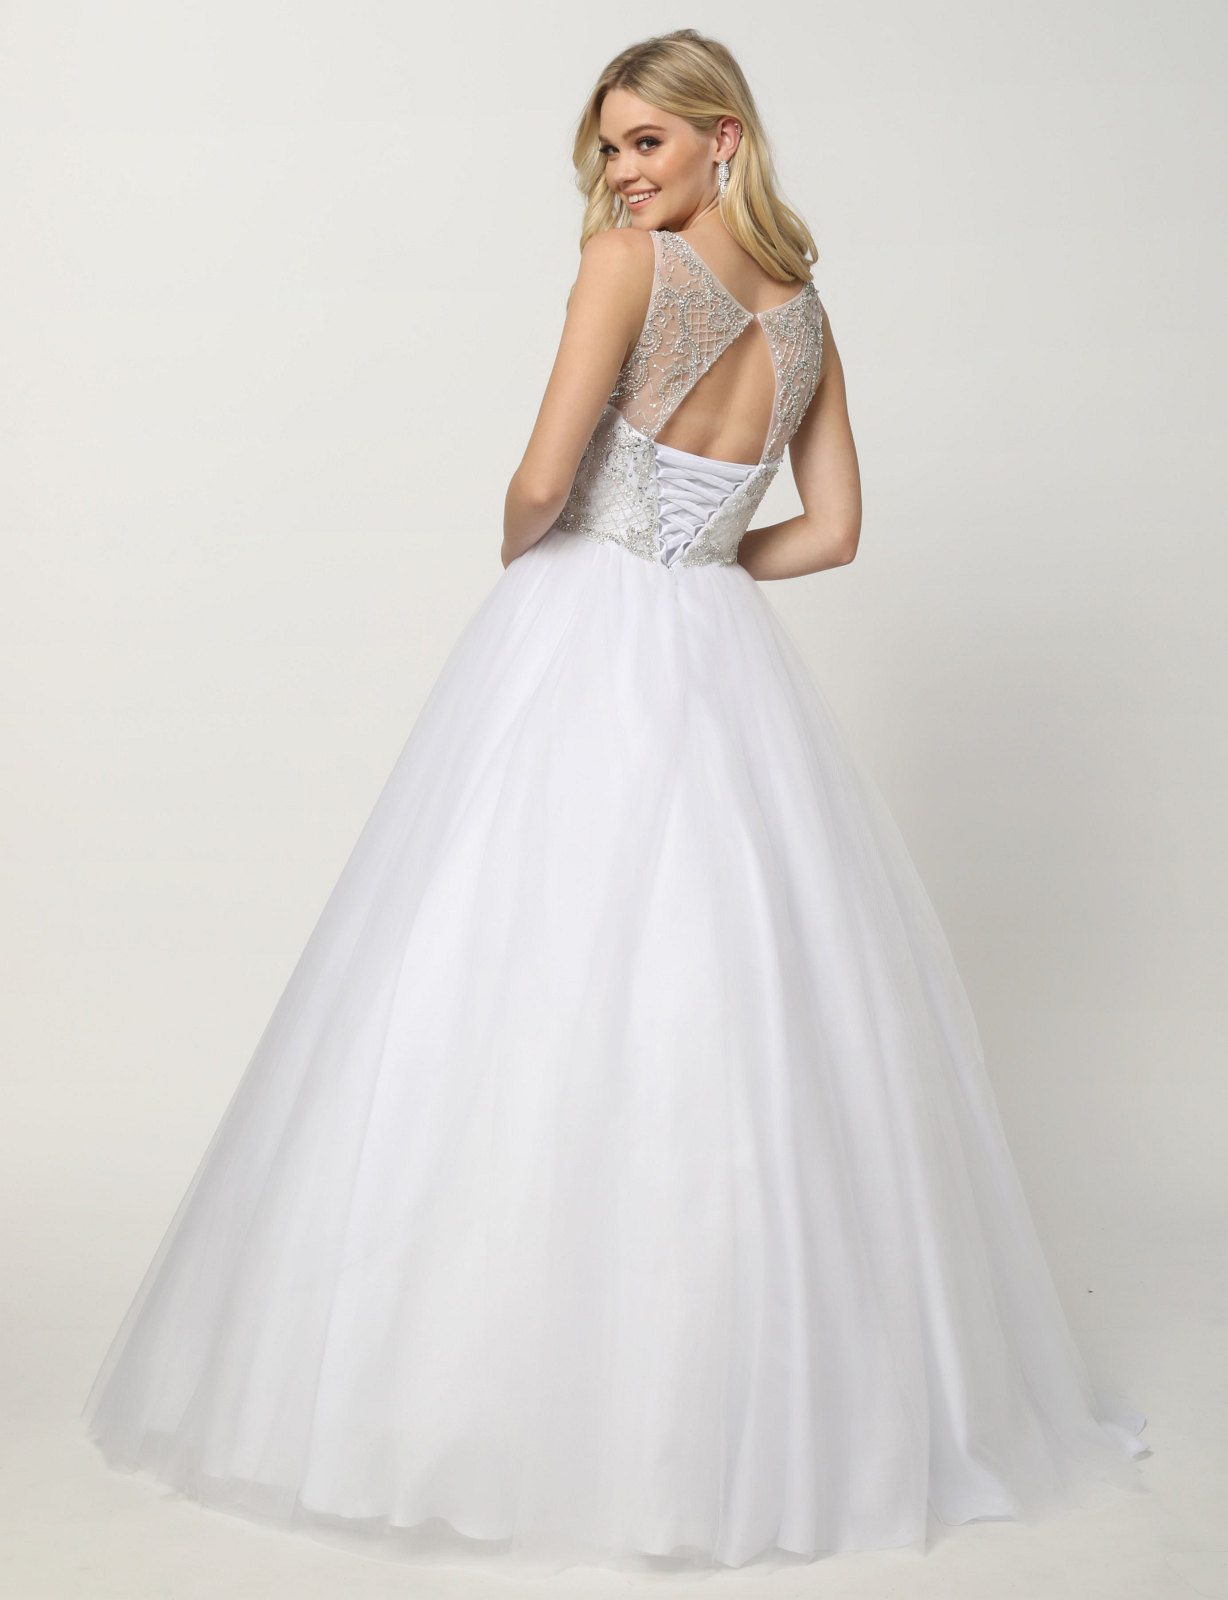 Juliet 1417 Quinceanera Dress Poofy Ballgown White Beaded Bodice